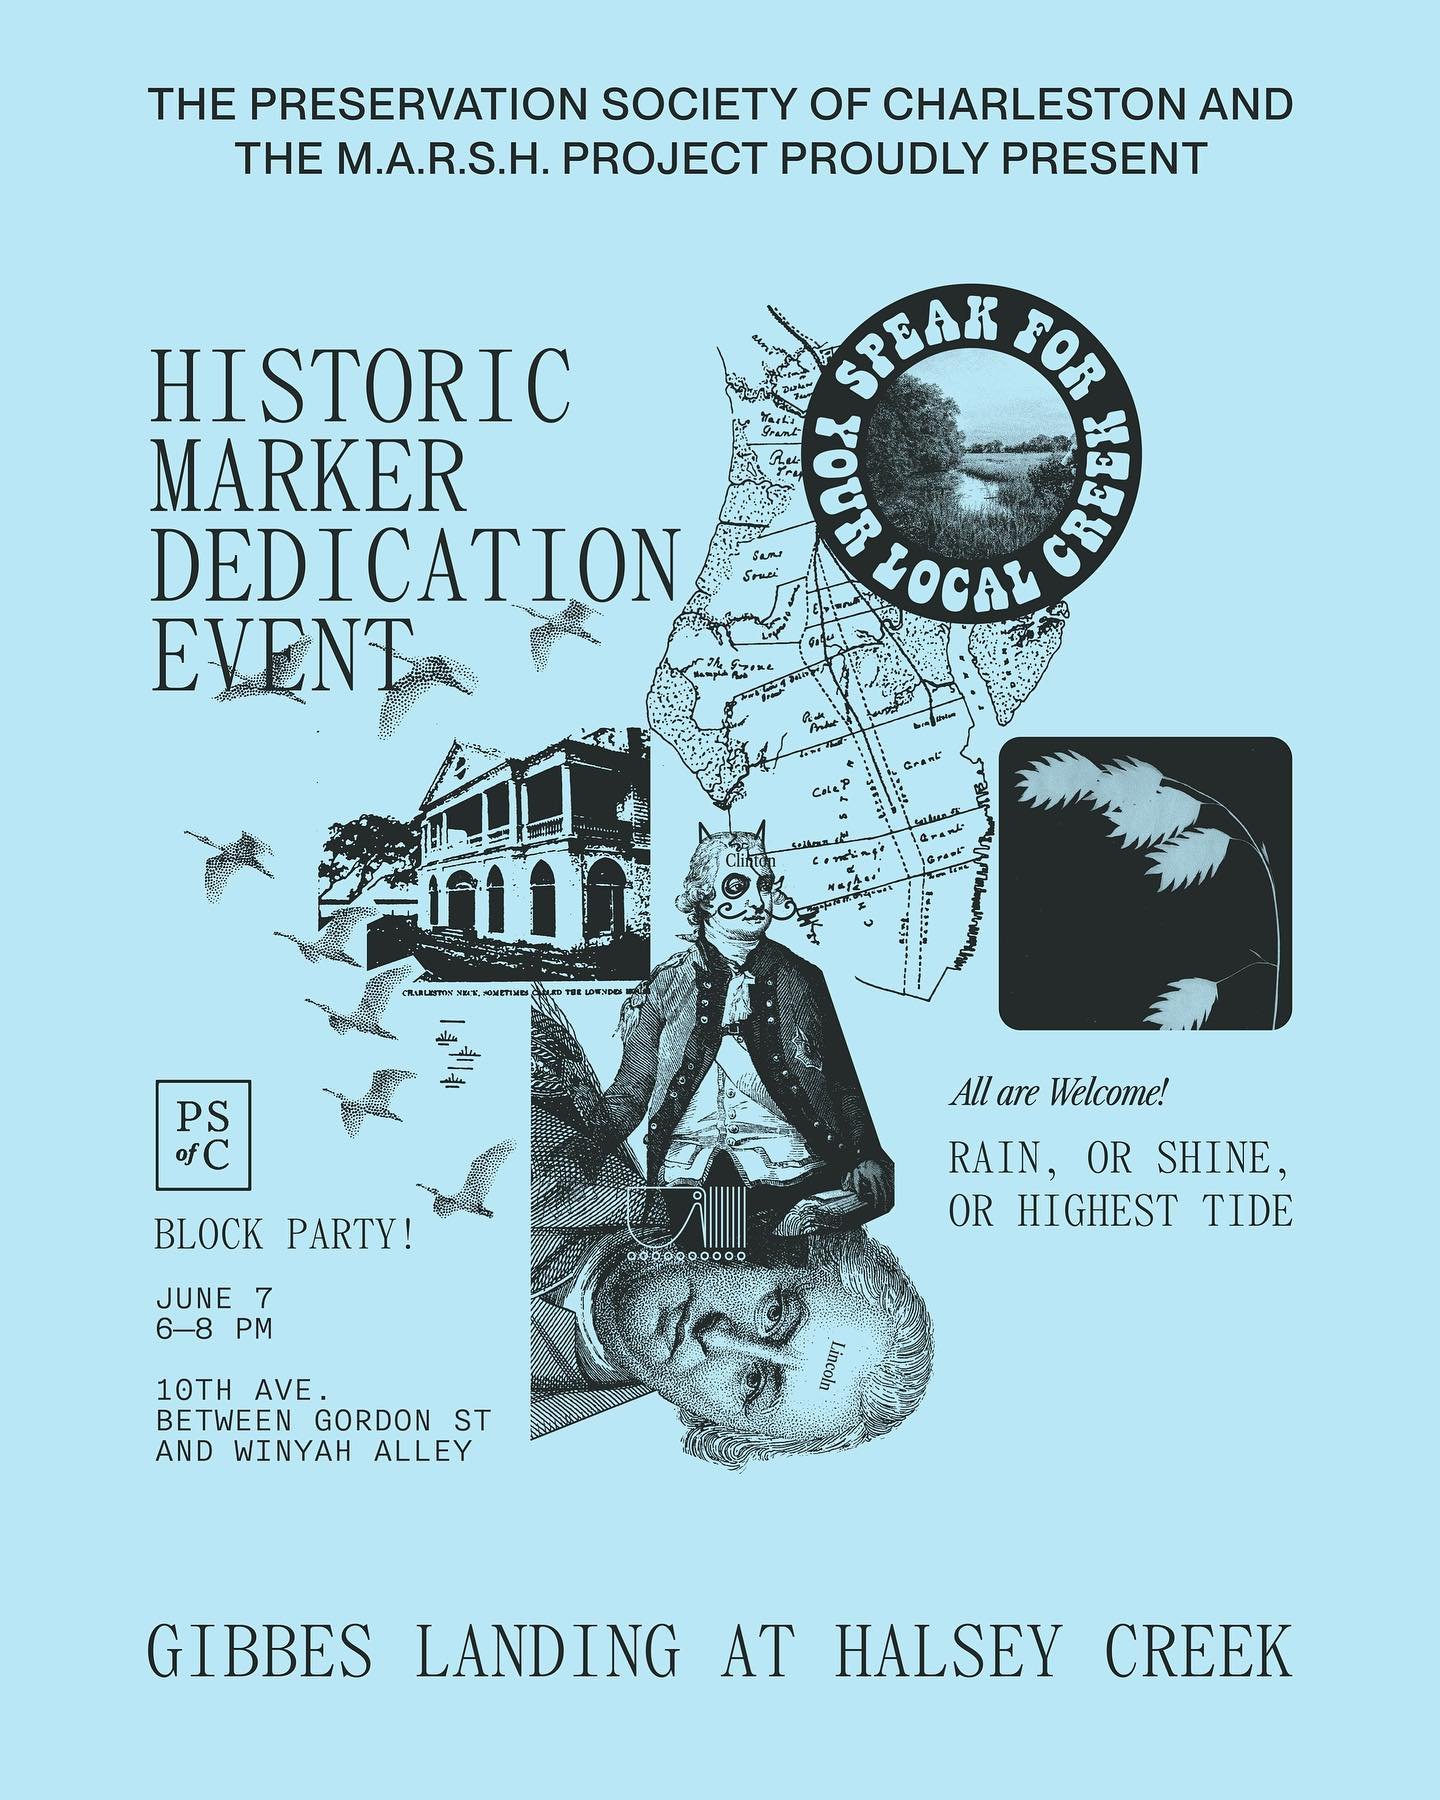 Save the Date Charleston! We&rsquo;ve been deep in the history books with @preservationsociety for this one! On June 7, Halsey Creek will officially have a historic marker on 10th Avenue. To celebrate we&rsquo;re shutting down 10th from Gordon to Win